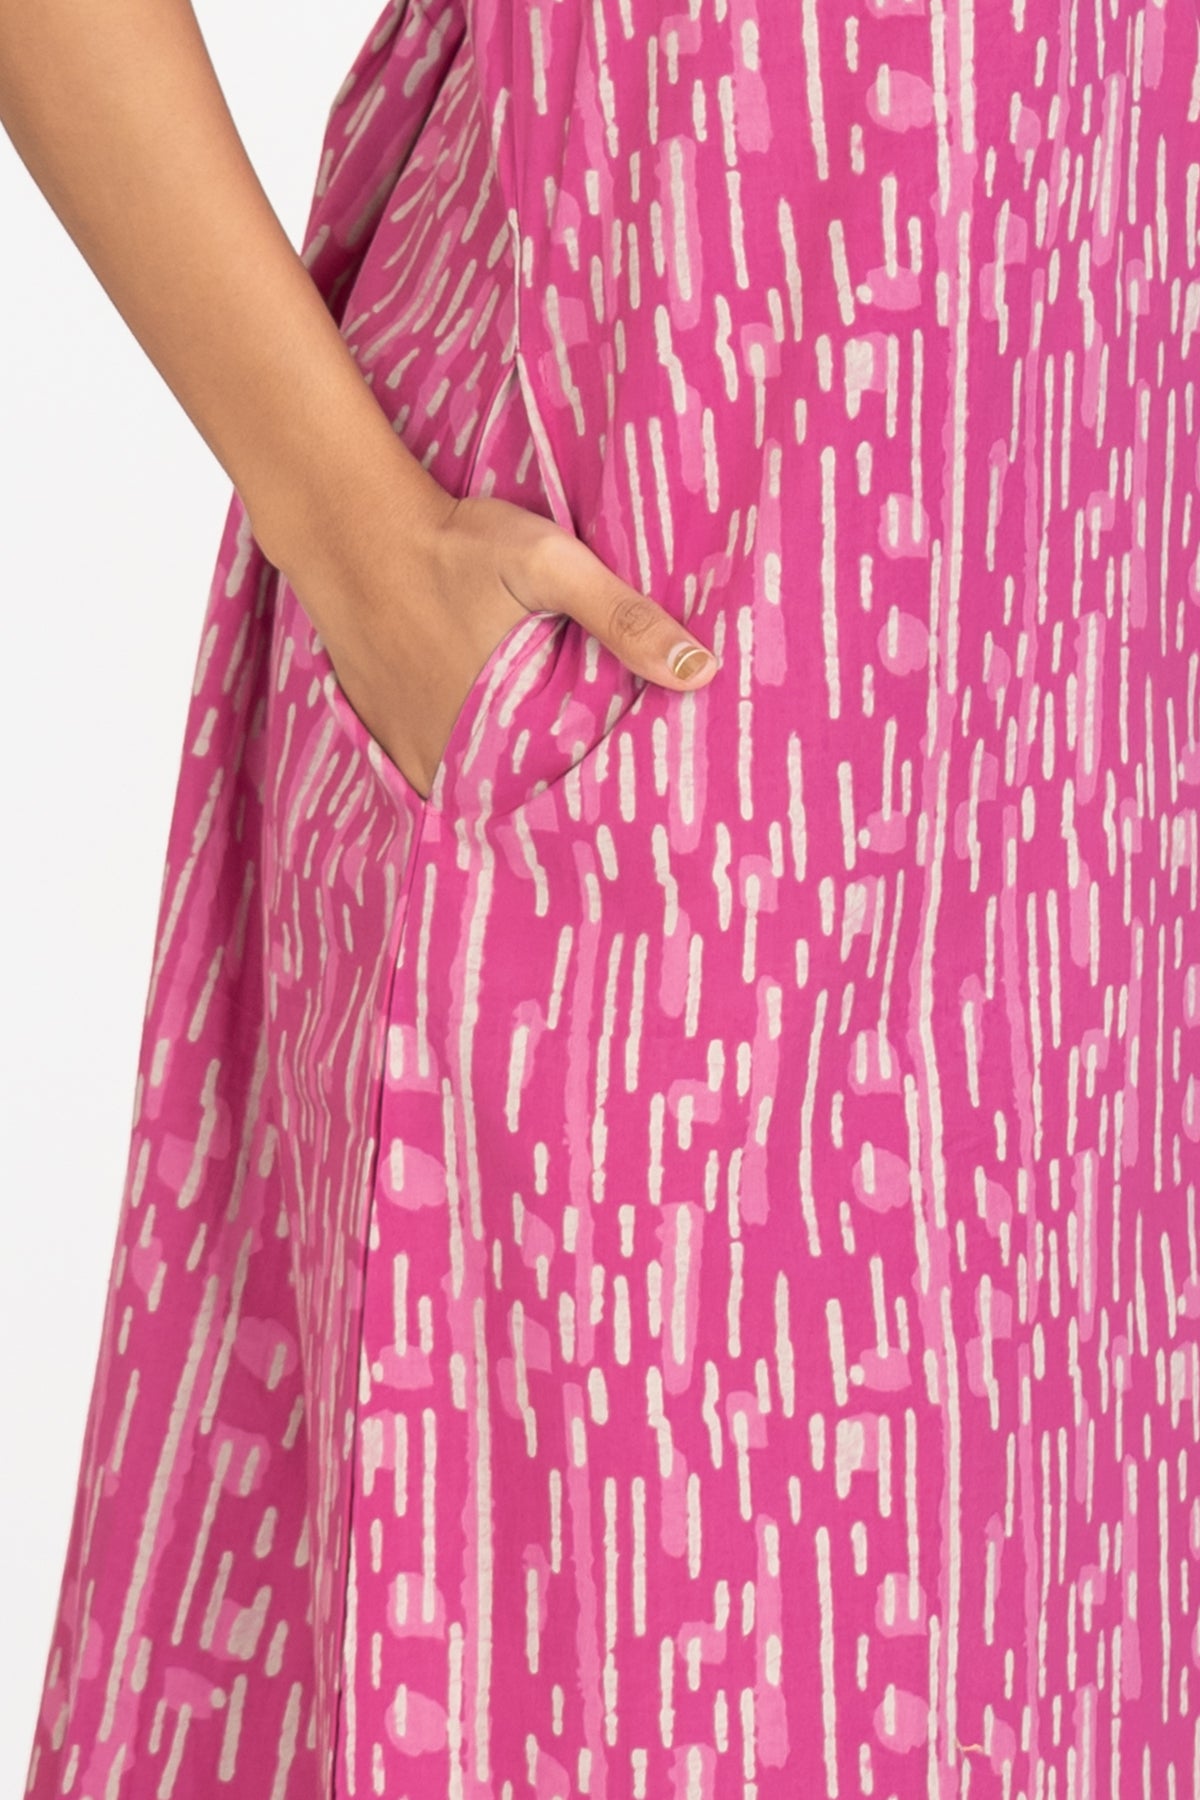 All Over Geometric Printed With Contrast Floral Motif Embroidered Yoke Nighty - Pink